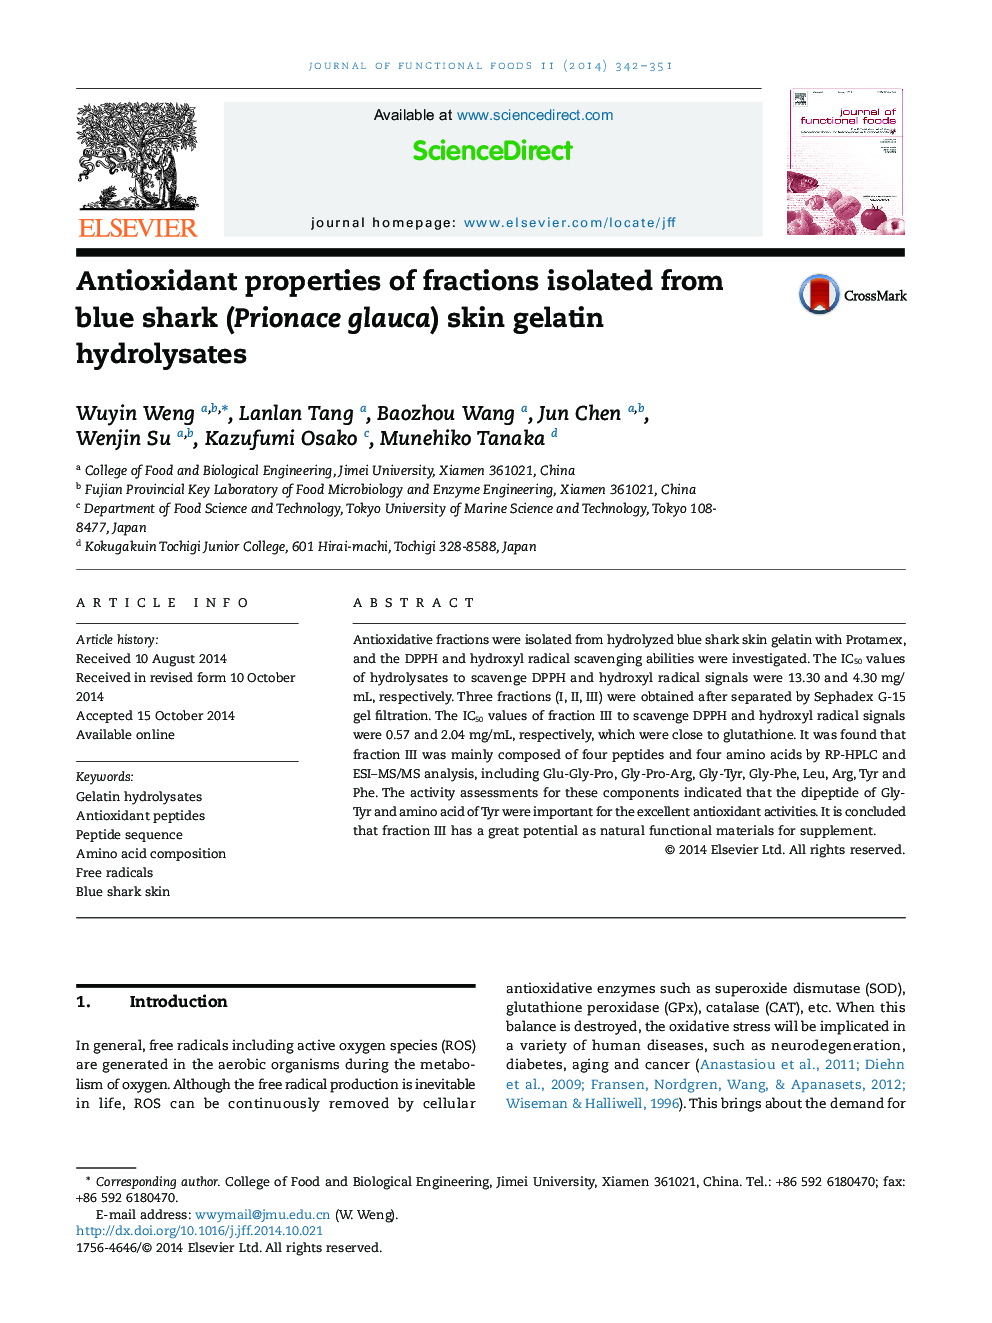 Antioxidant properties of fractions isolated from blue shark (Prionace glauca) skin gelatin hydrolysates